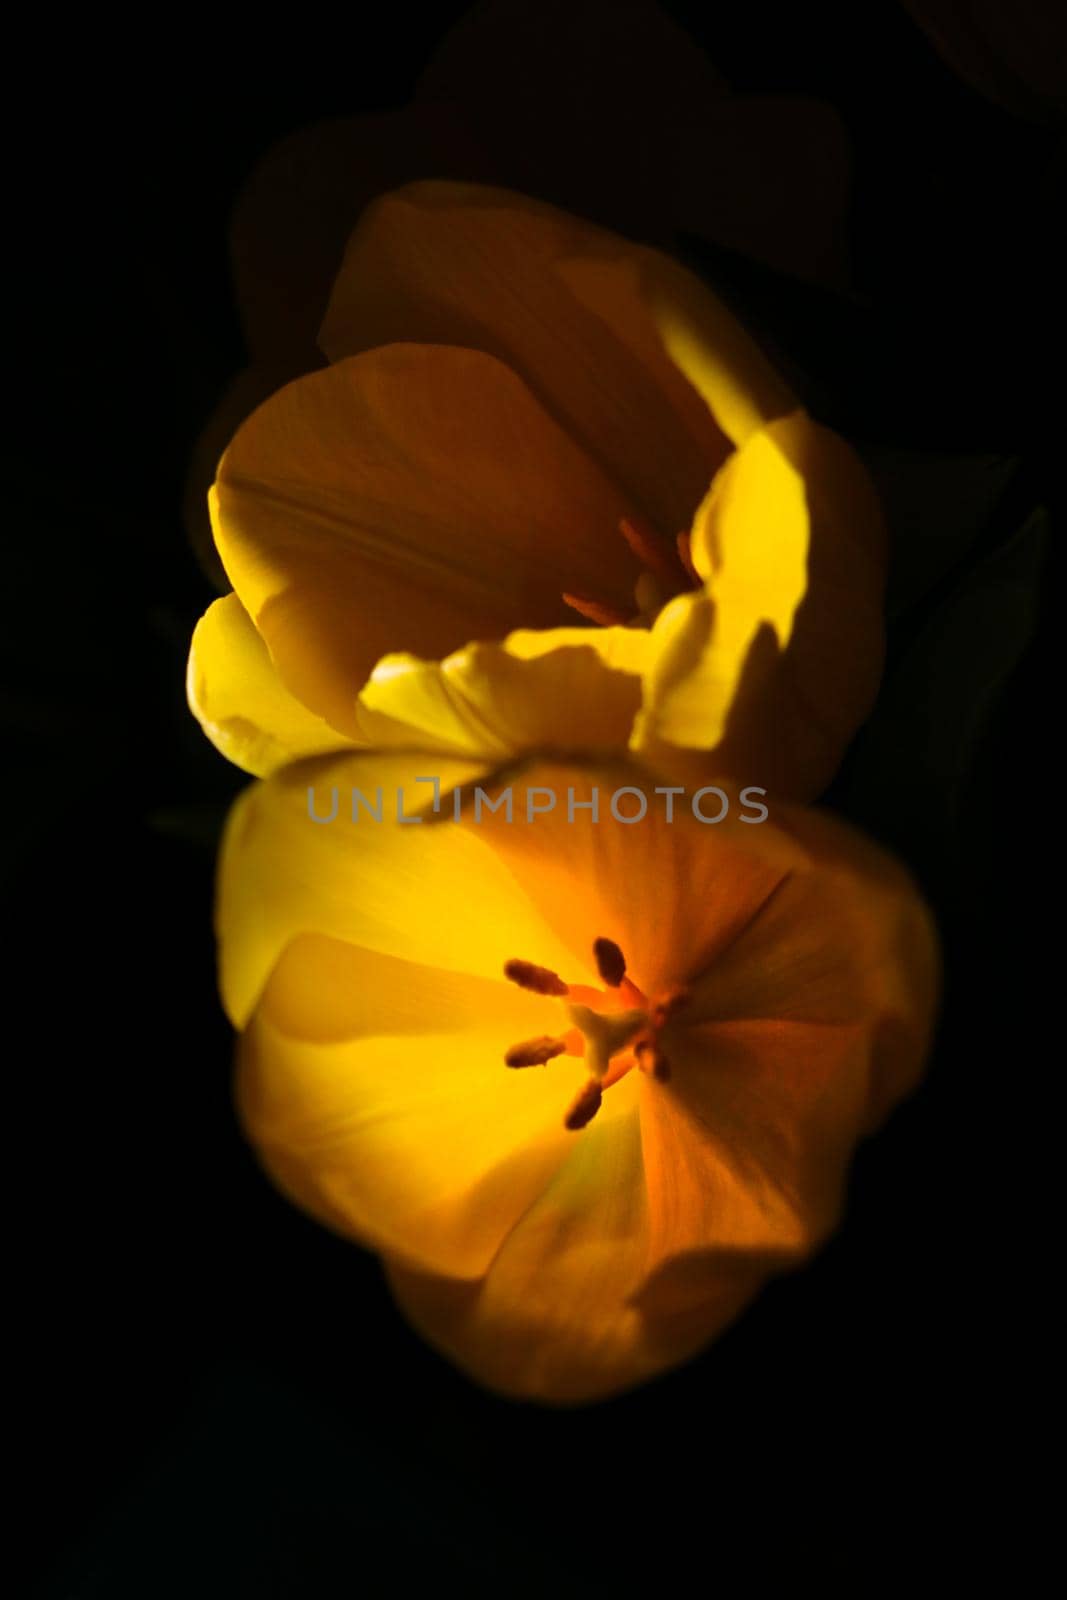 On a black background are blooming yellow tulips